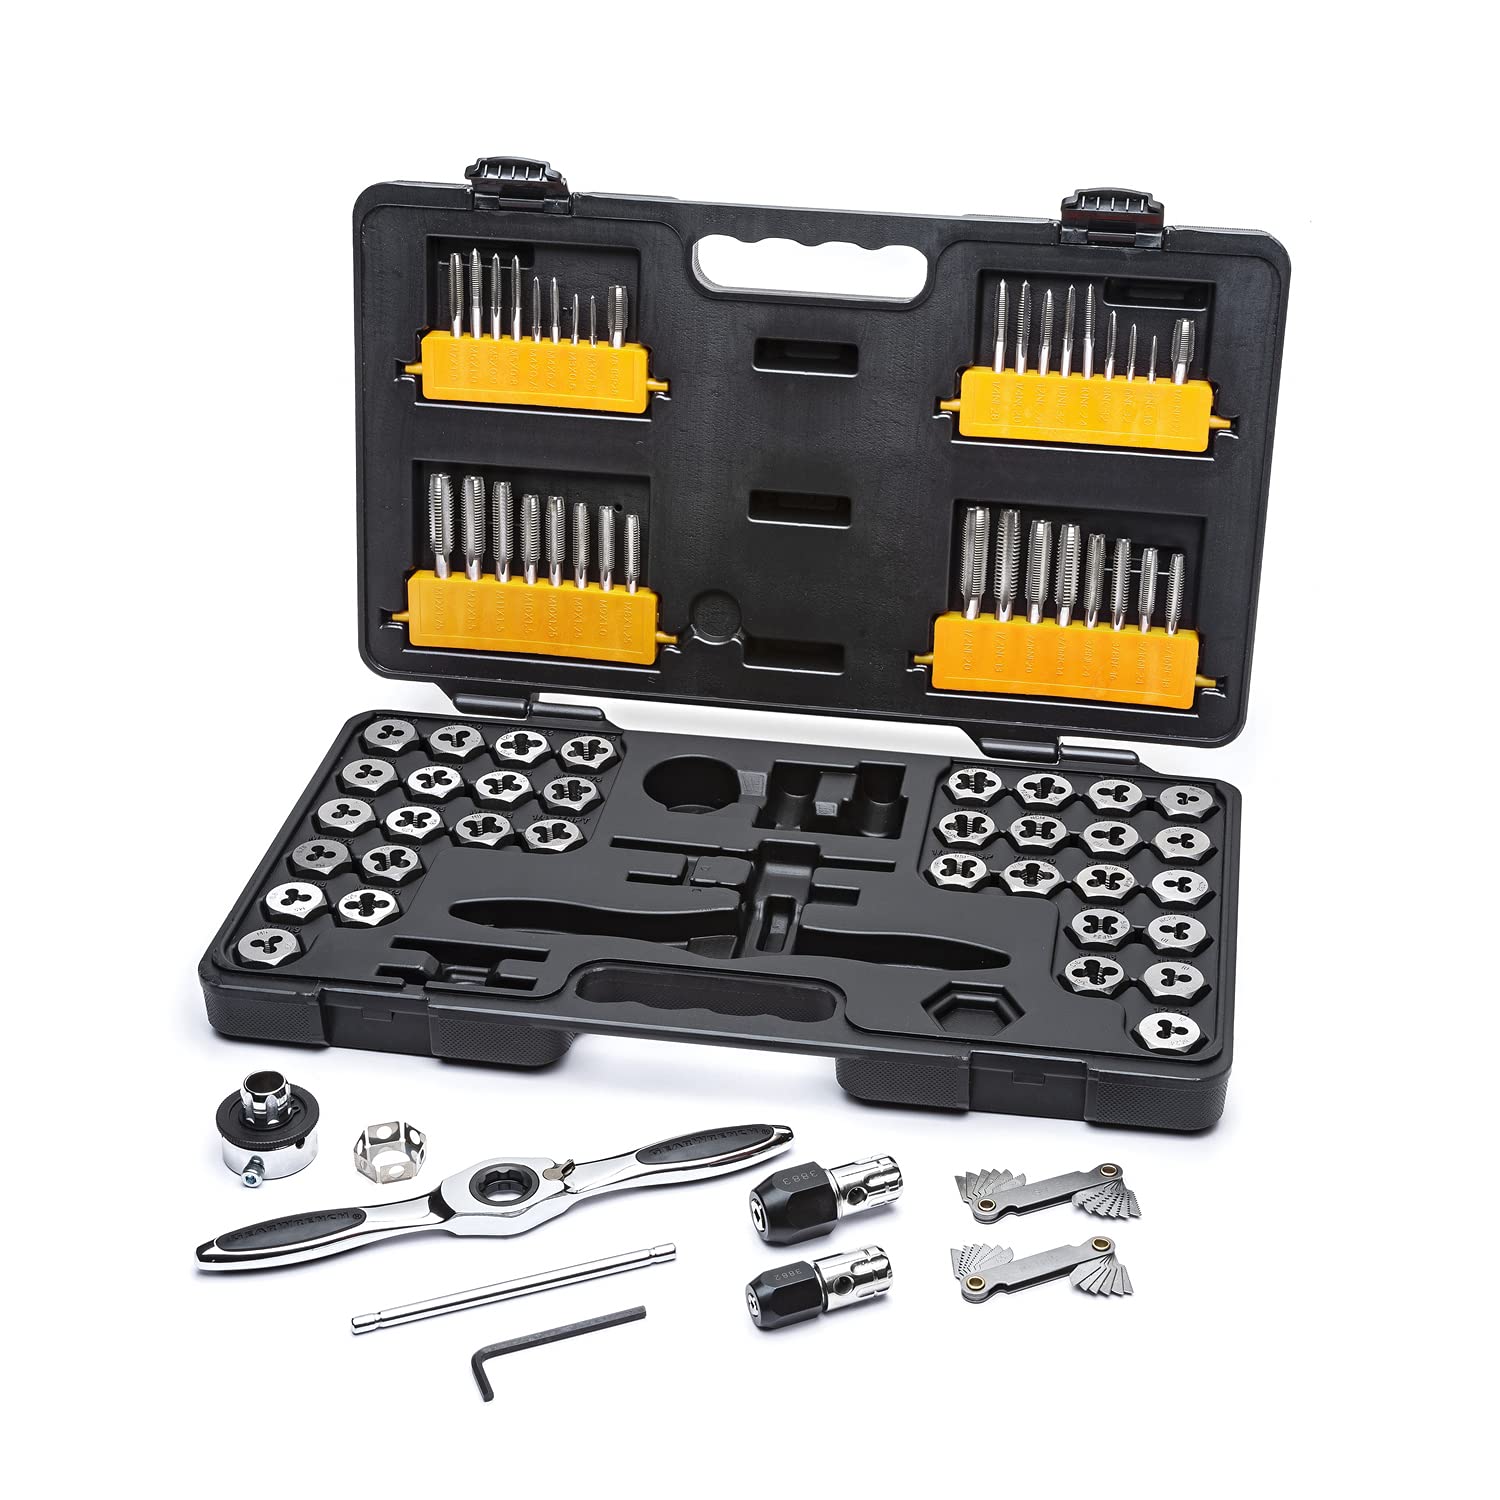 77-Piece GearWrench Ratcheting Tap & Die Tool Set (SAE/Metric) $106.24 + Free Shipping